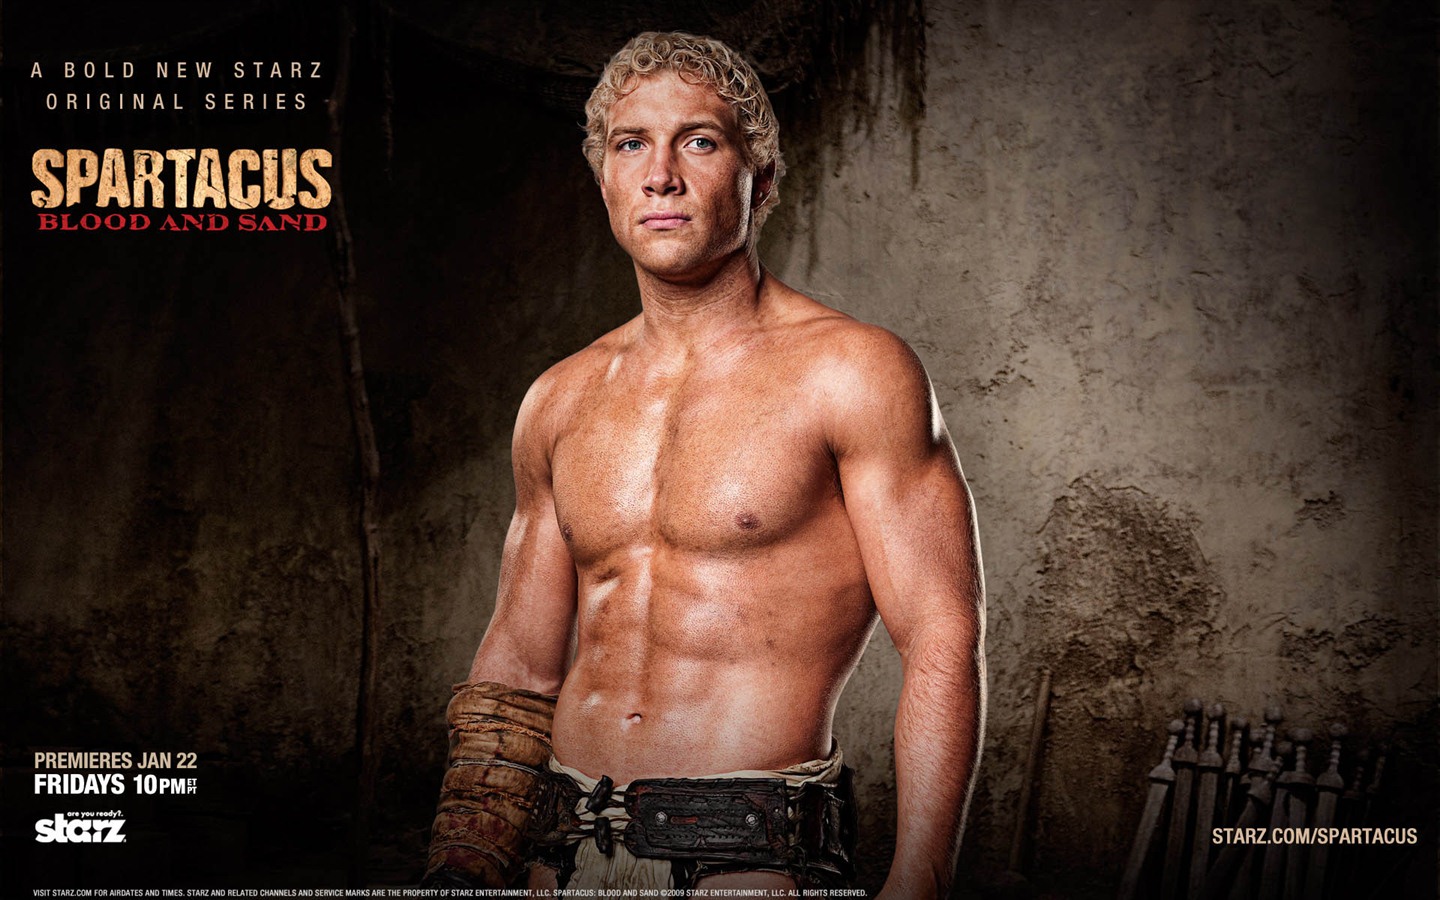 Spartacus: Blood and Sand HD wallpapers #2 - 1440x900